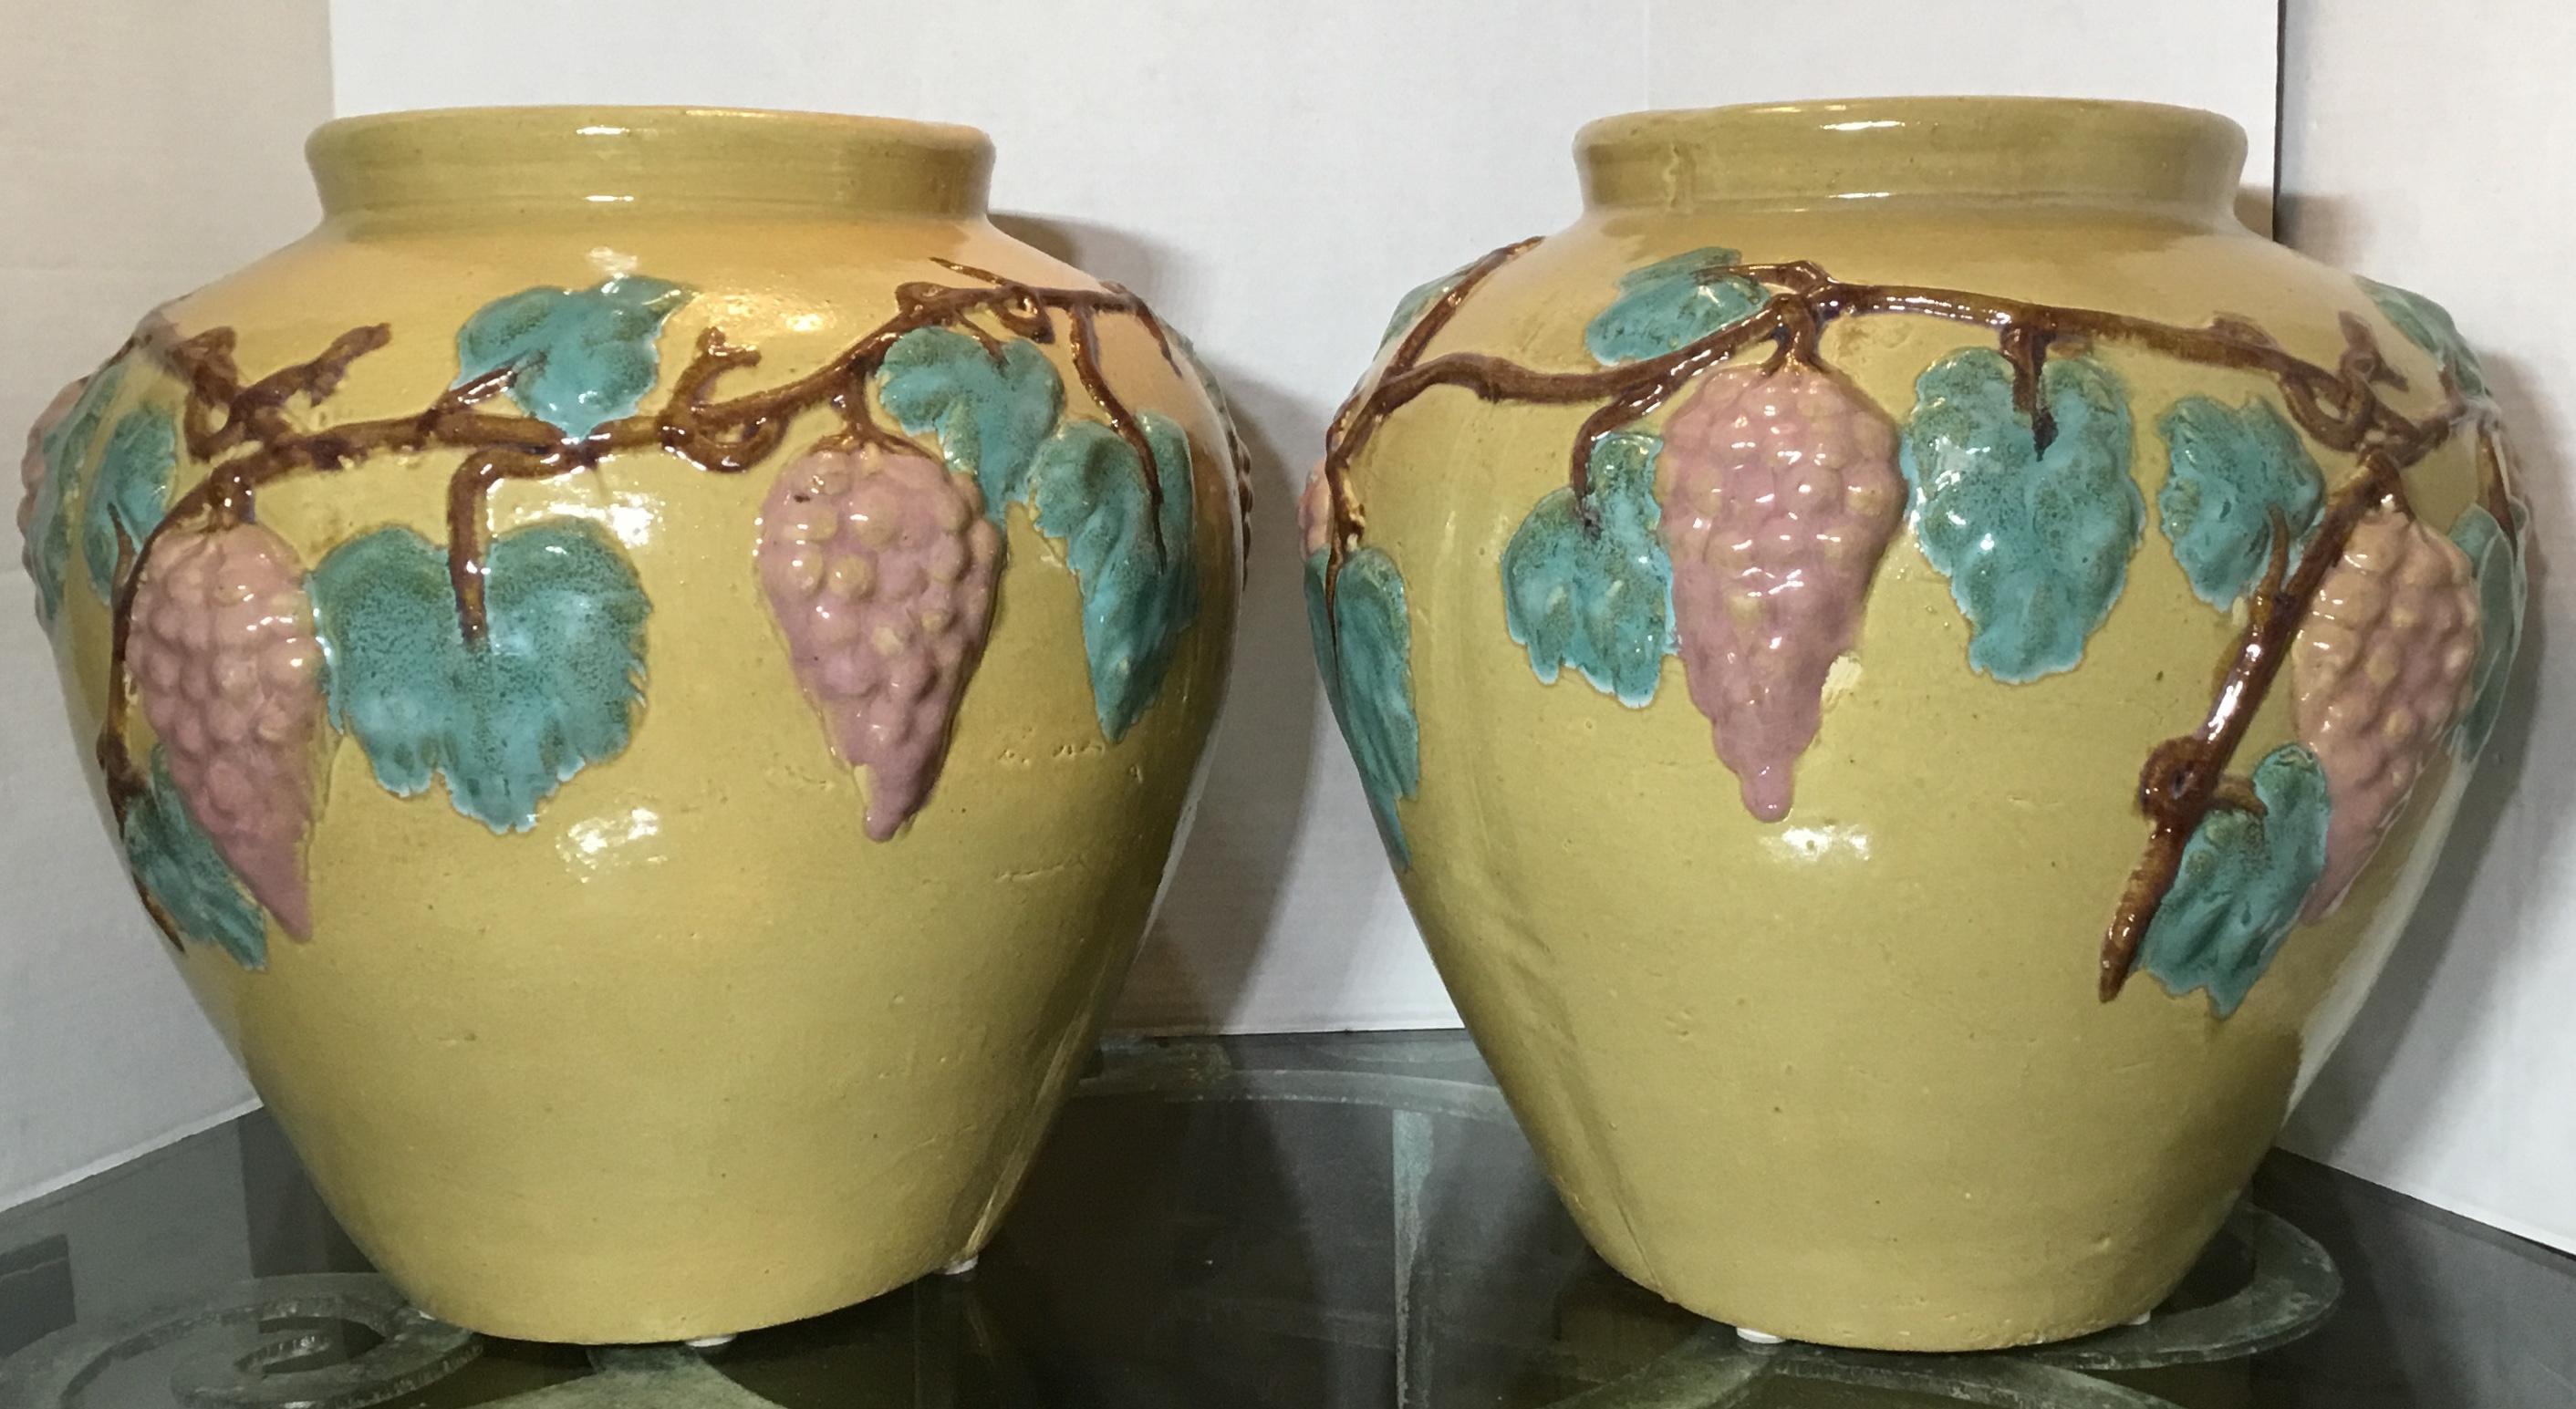 Exceptional pair of vases or planters made of ceramic, hand painted and glazed of grape vine motifs all around, beautiful colors. Could be used as planters or just decorative pair of vases.
The opening size is 7”.5. Great object of art for